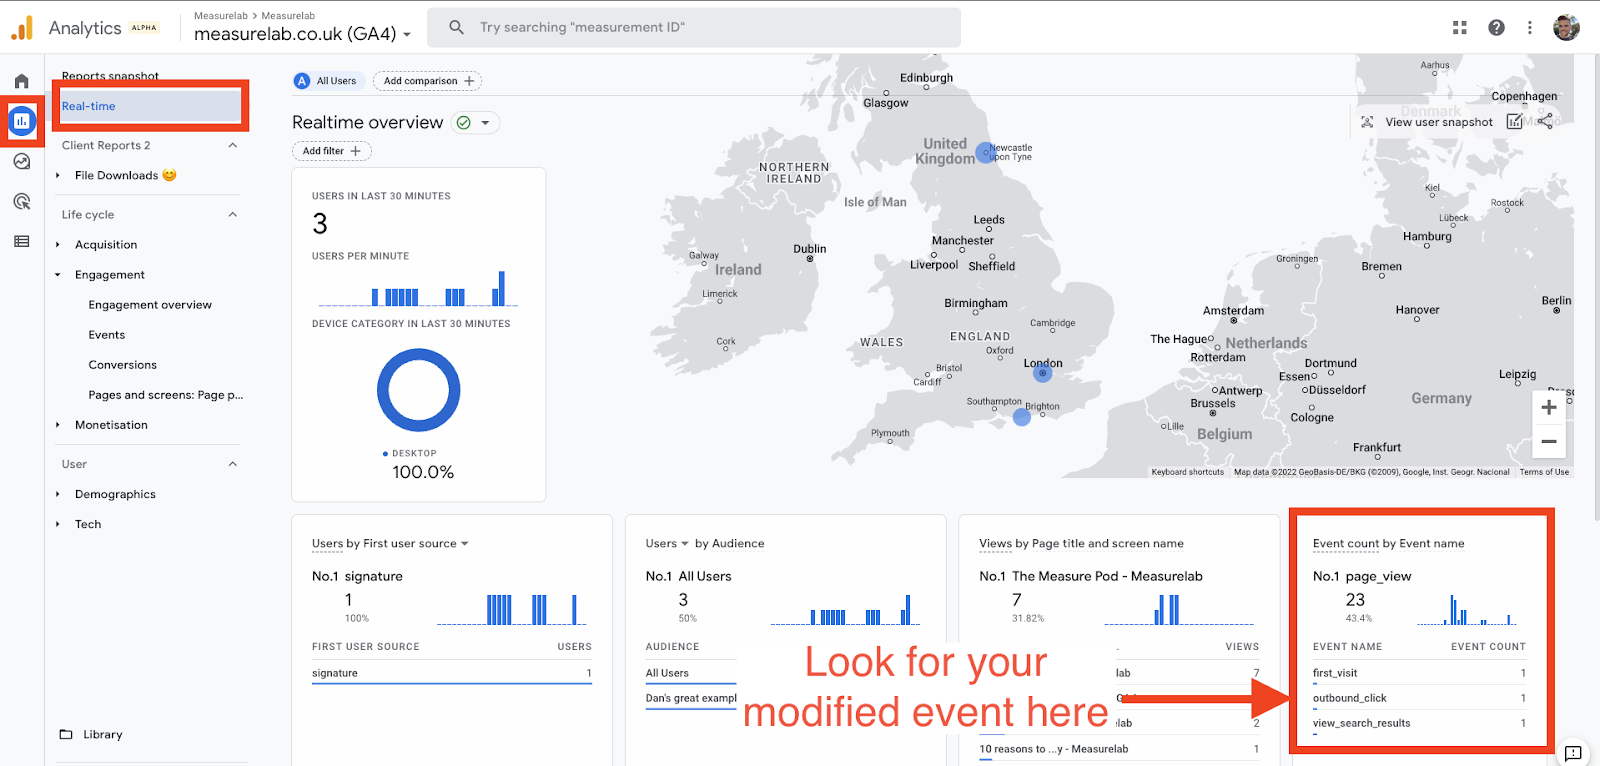 The Google Analytics (GA4) real-time report highlighting the 'Event count by Event name' section.